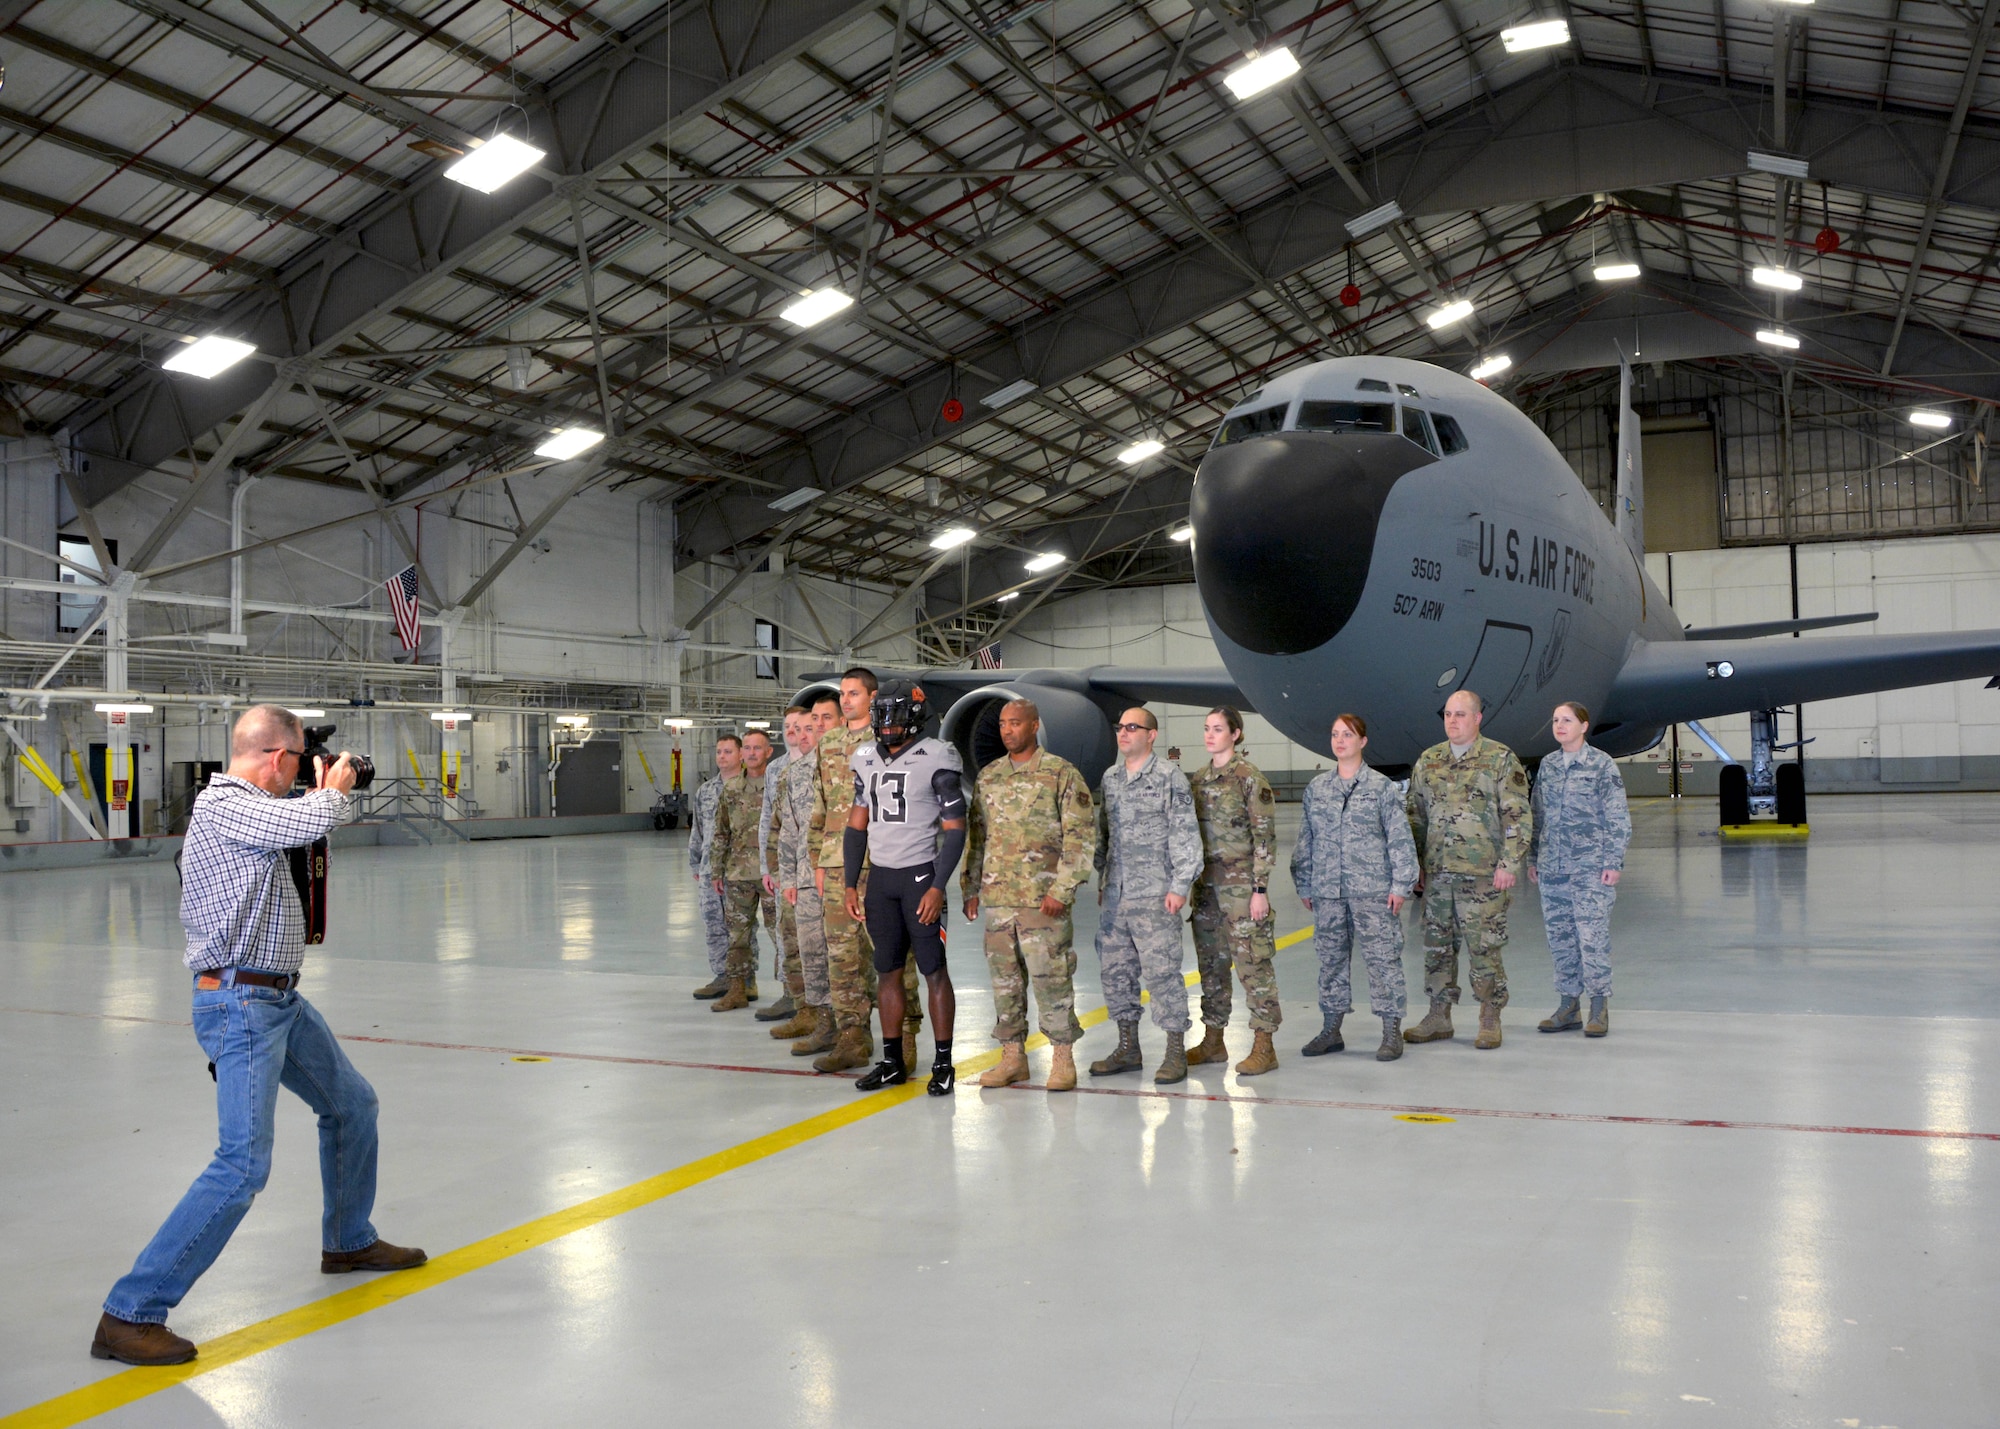 An Oklahoma State University video crew visits the 507th Air Refueling Wing and takes footage of their military appreciation uniform with and in a KC-135R Stratotanker Oct. 9, 2019, at Tinker Air Force Base, Oklahoma. (U.S. Air Force photo by Tech. Sgt. Samantha Mathison)